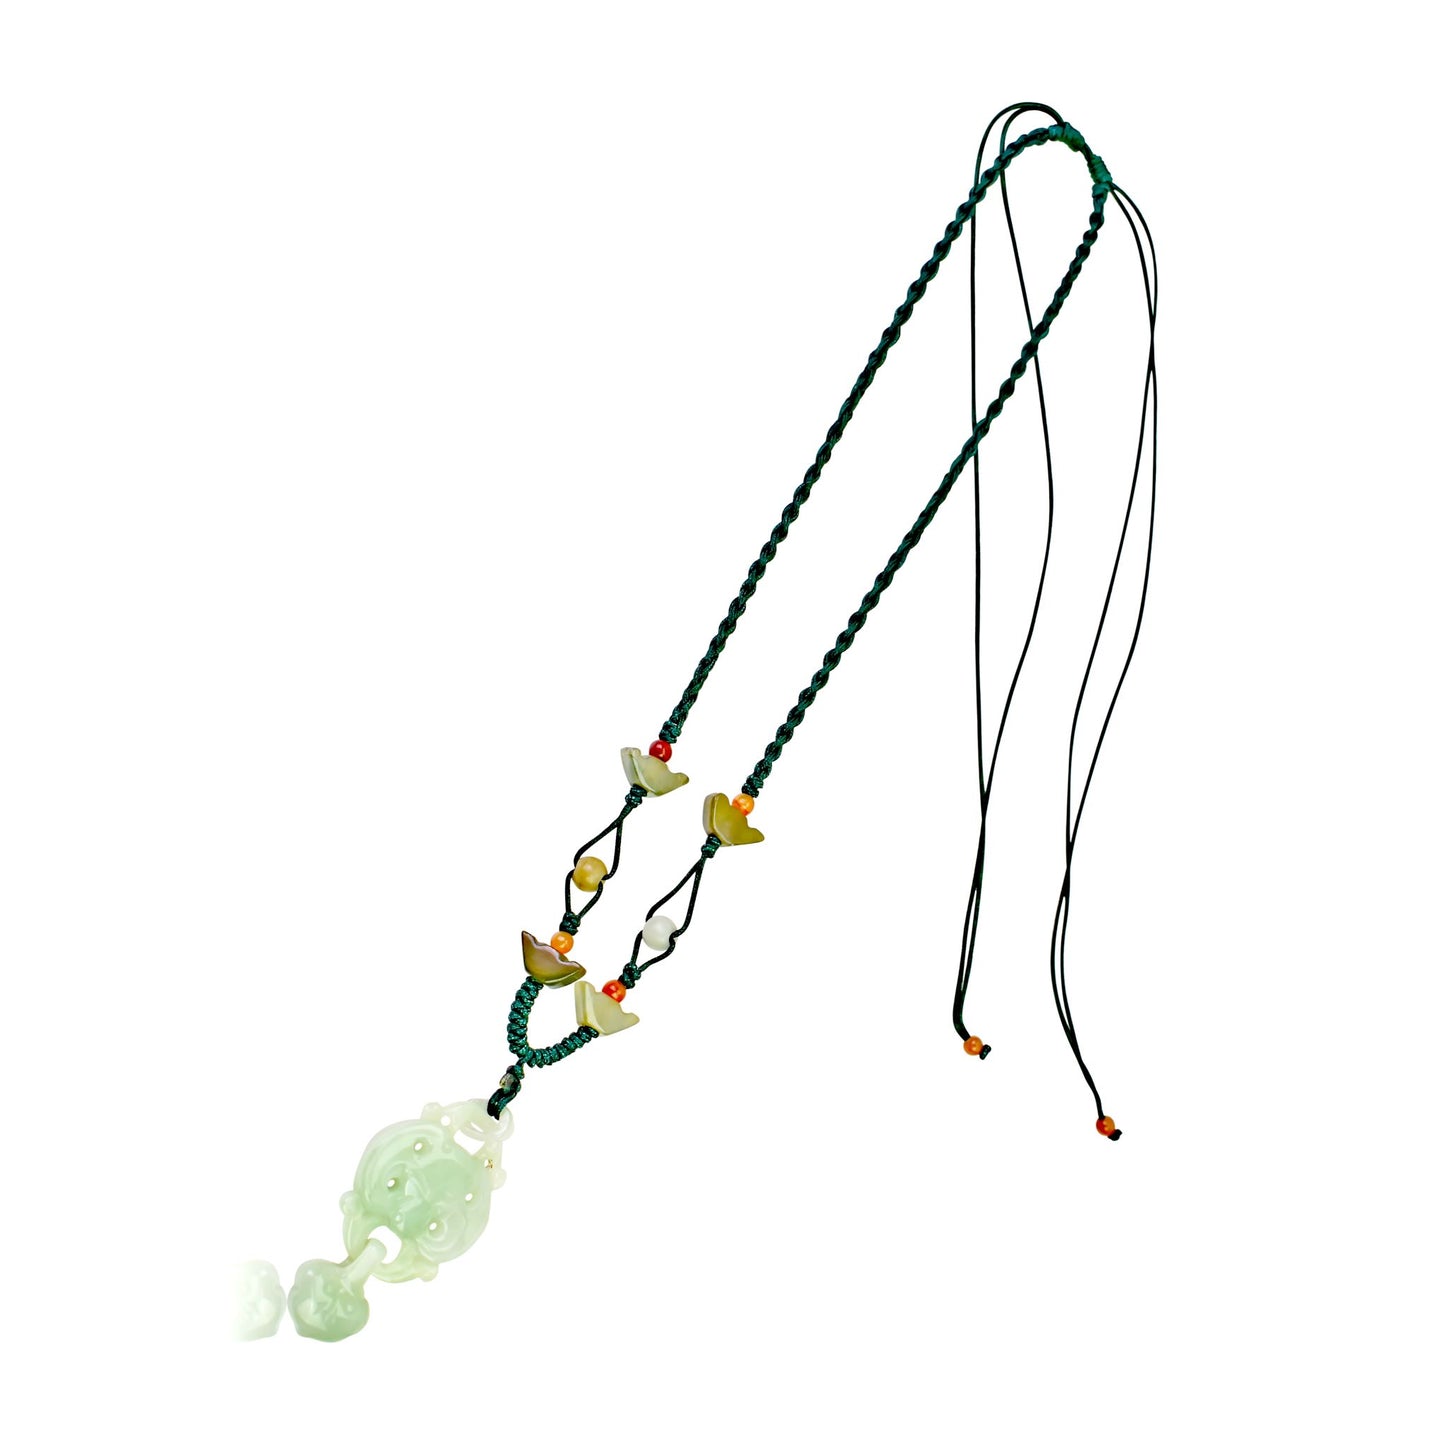 Elevate your Luck with Bat and Heart Handmade Jade Necklace Pendant made with Green Cord